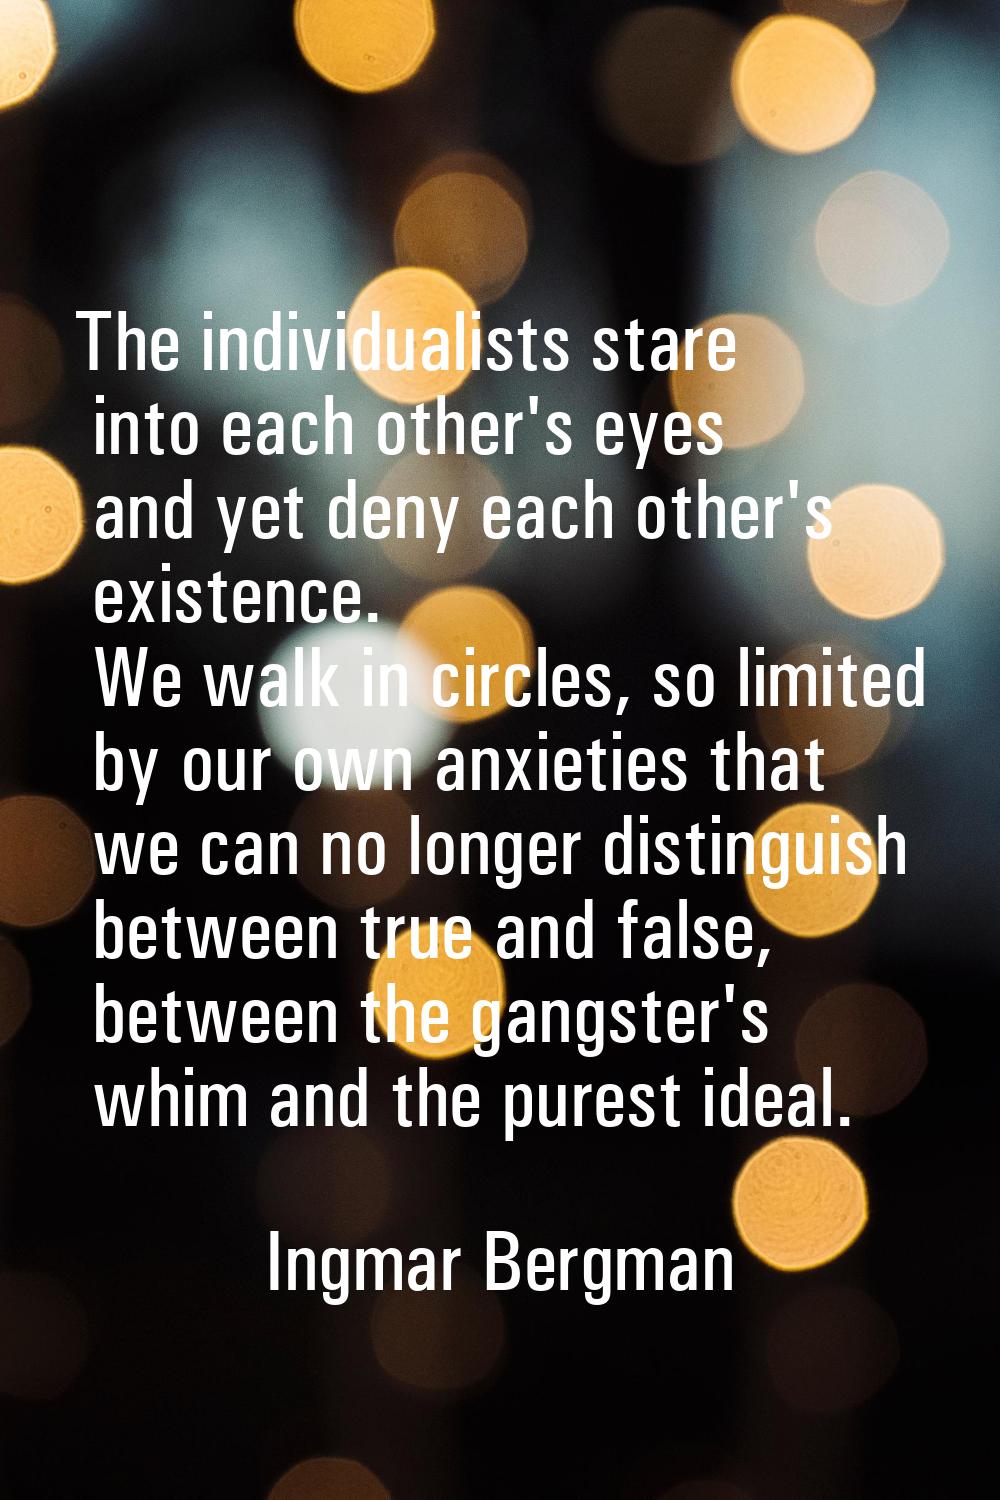 The individualists stare into each other's eyes and yet deny each other's existence. We walk in cir